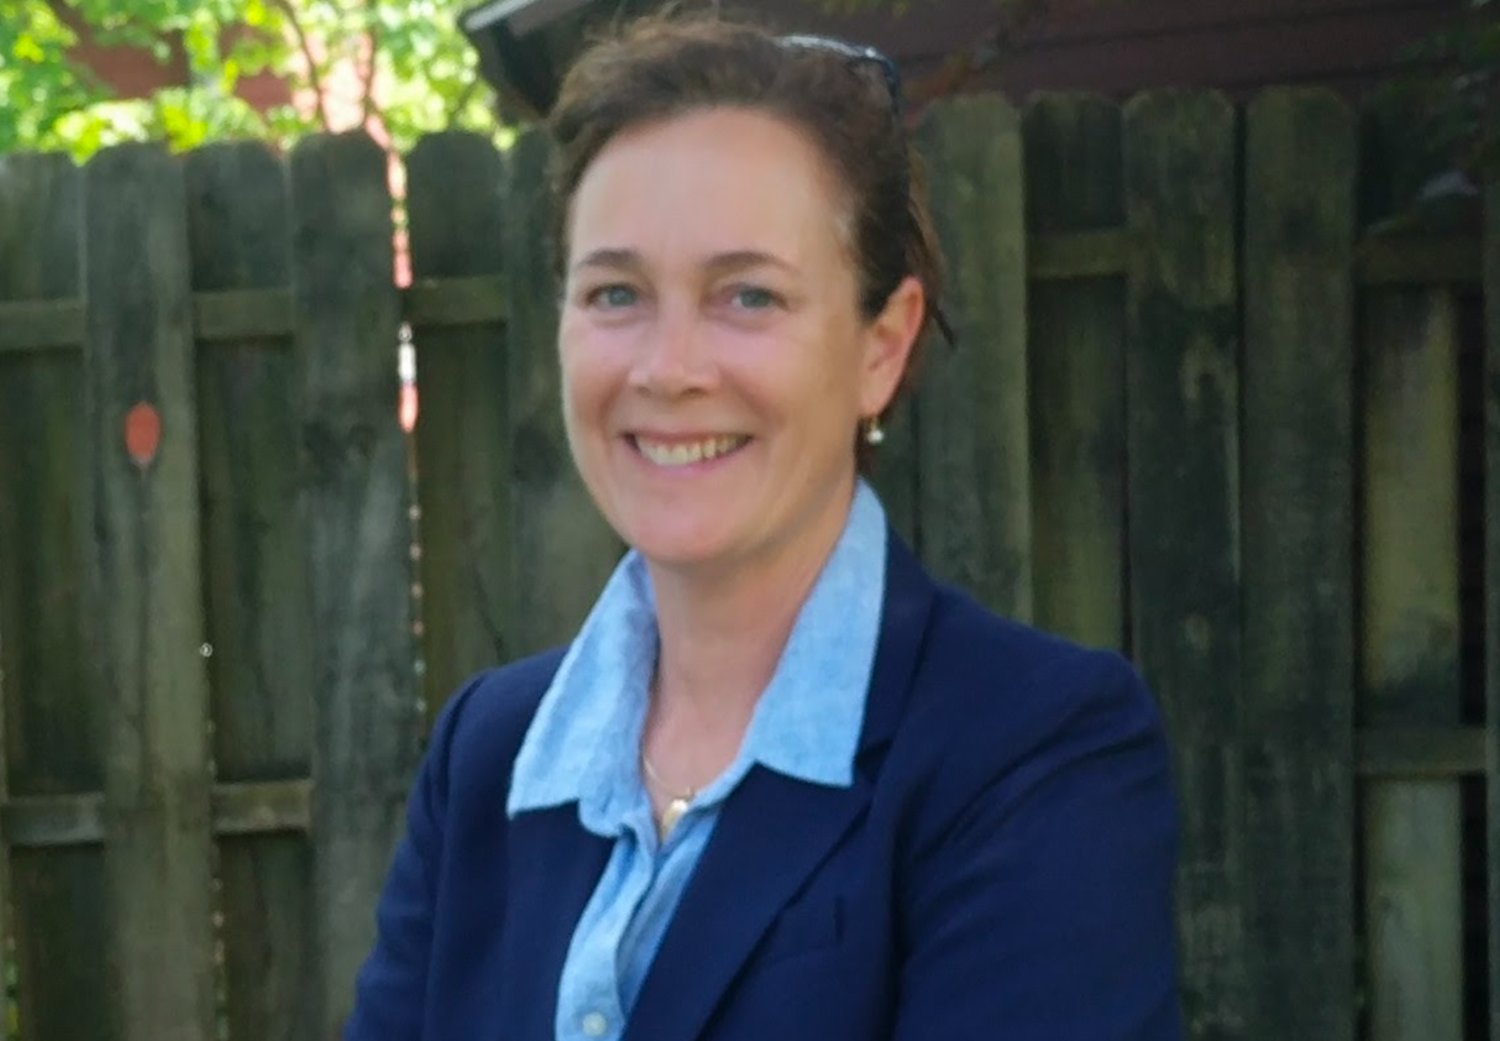 Susannah Holloway announced recently she is running for the RI Senate District 32 seat.